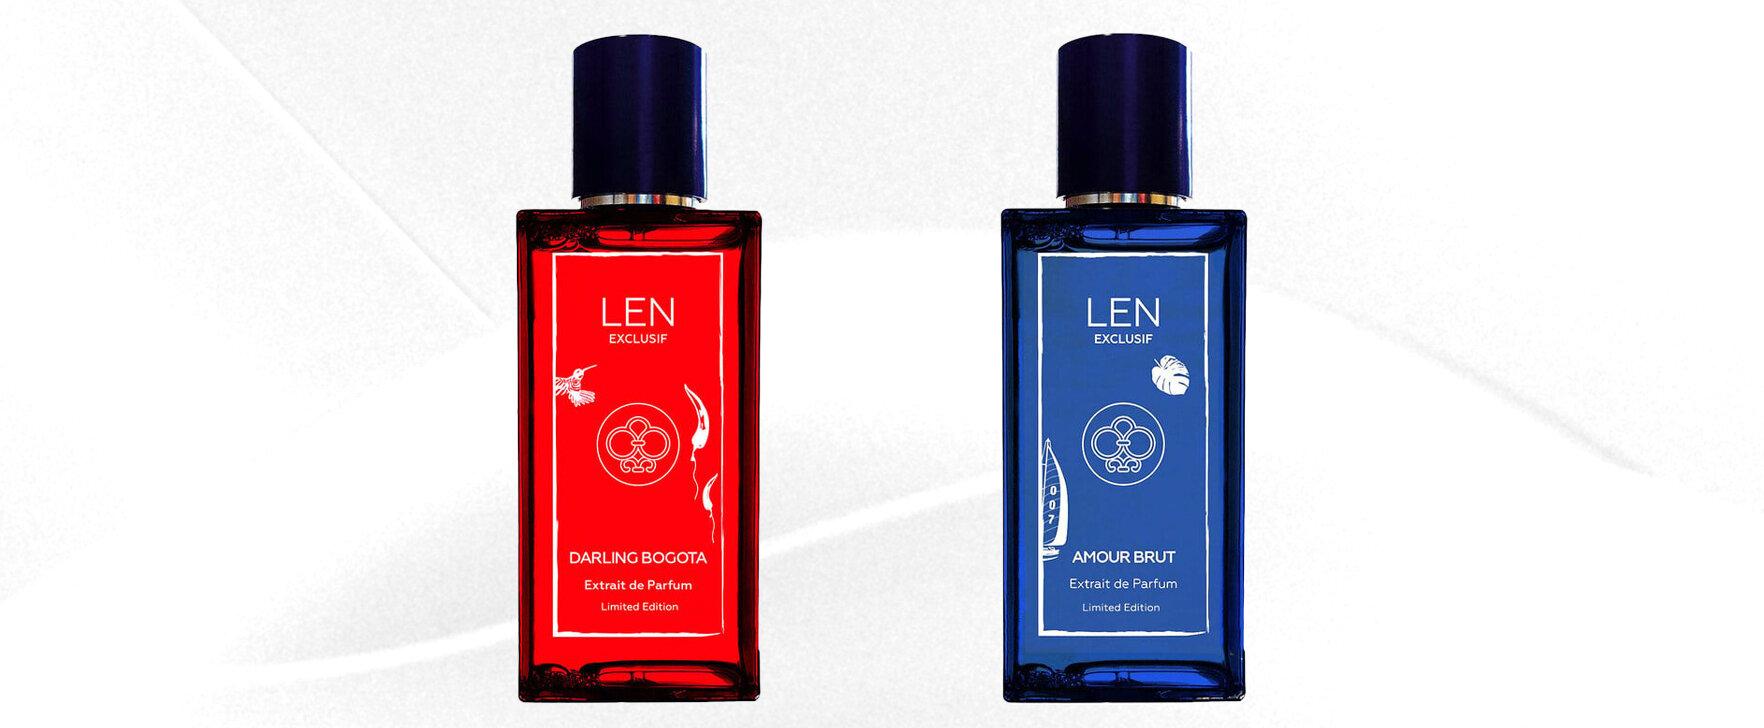 Darling Bogota and Amour Brut: The New Limited Edition Extraits de Parfum From LEN Fragrance